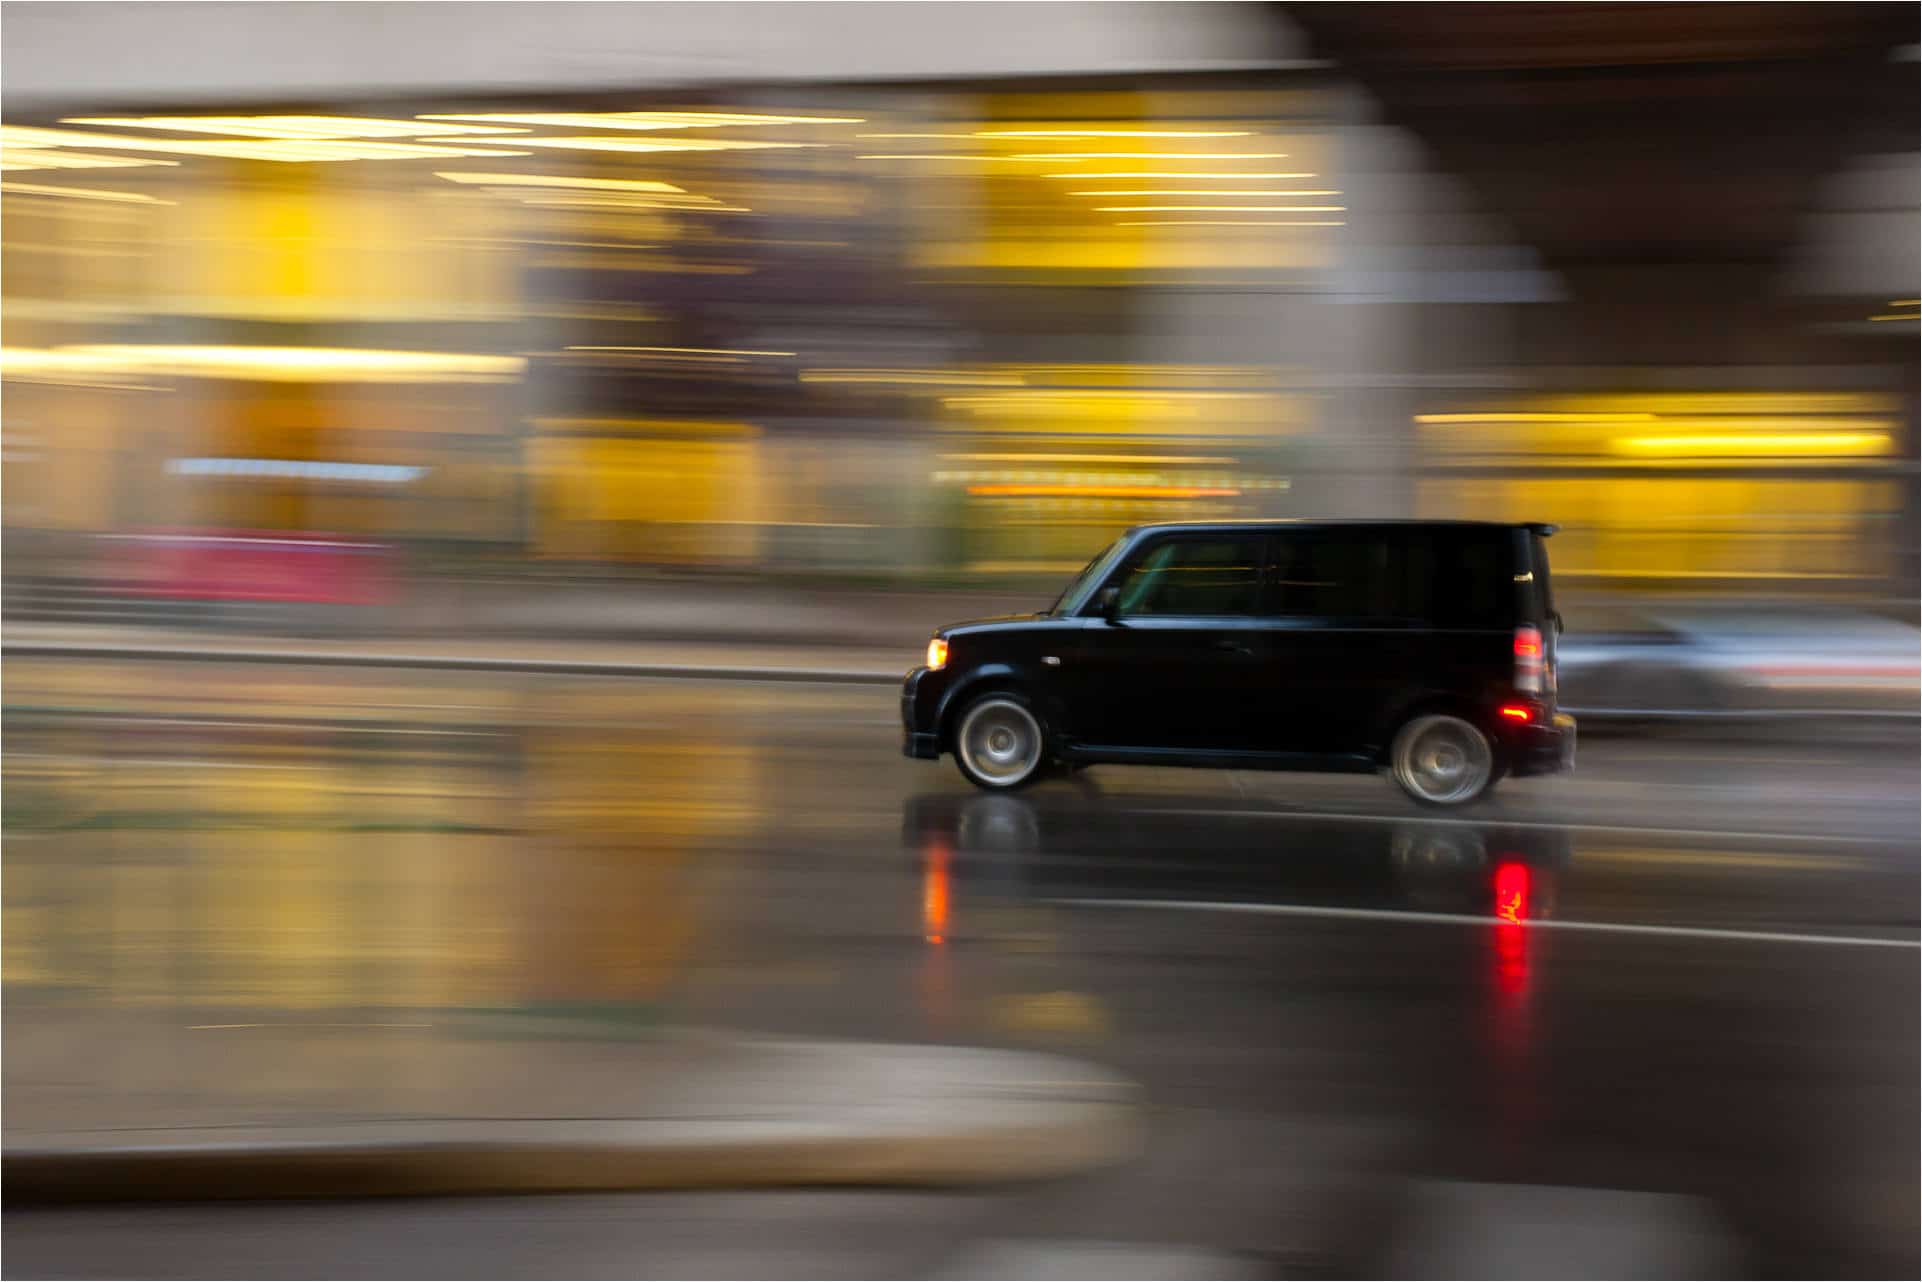 motion-panning-c2a9-2011-christopher-martin-8118